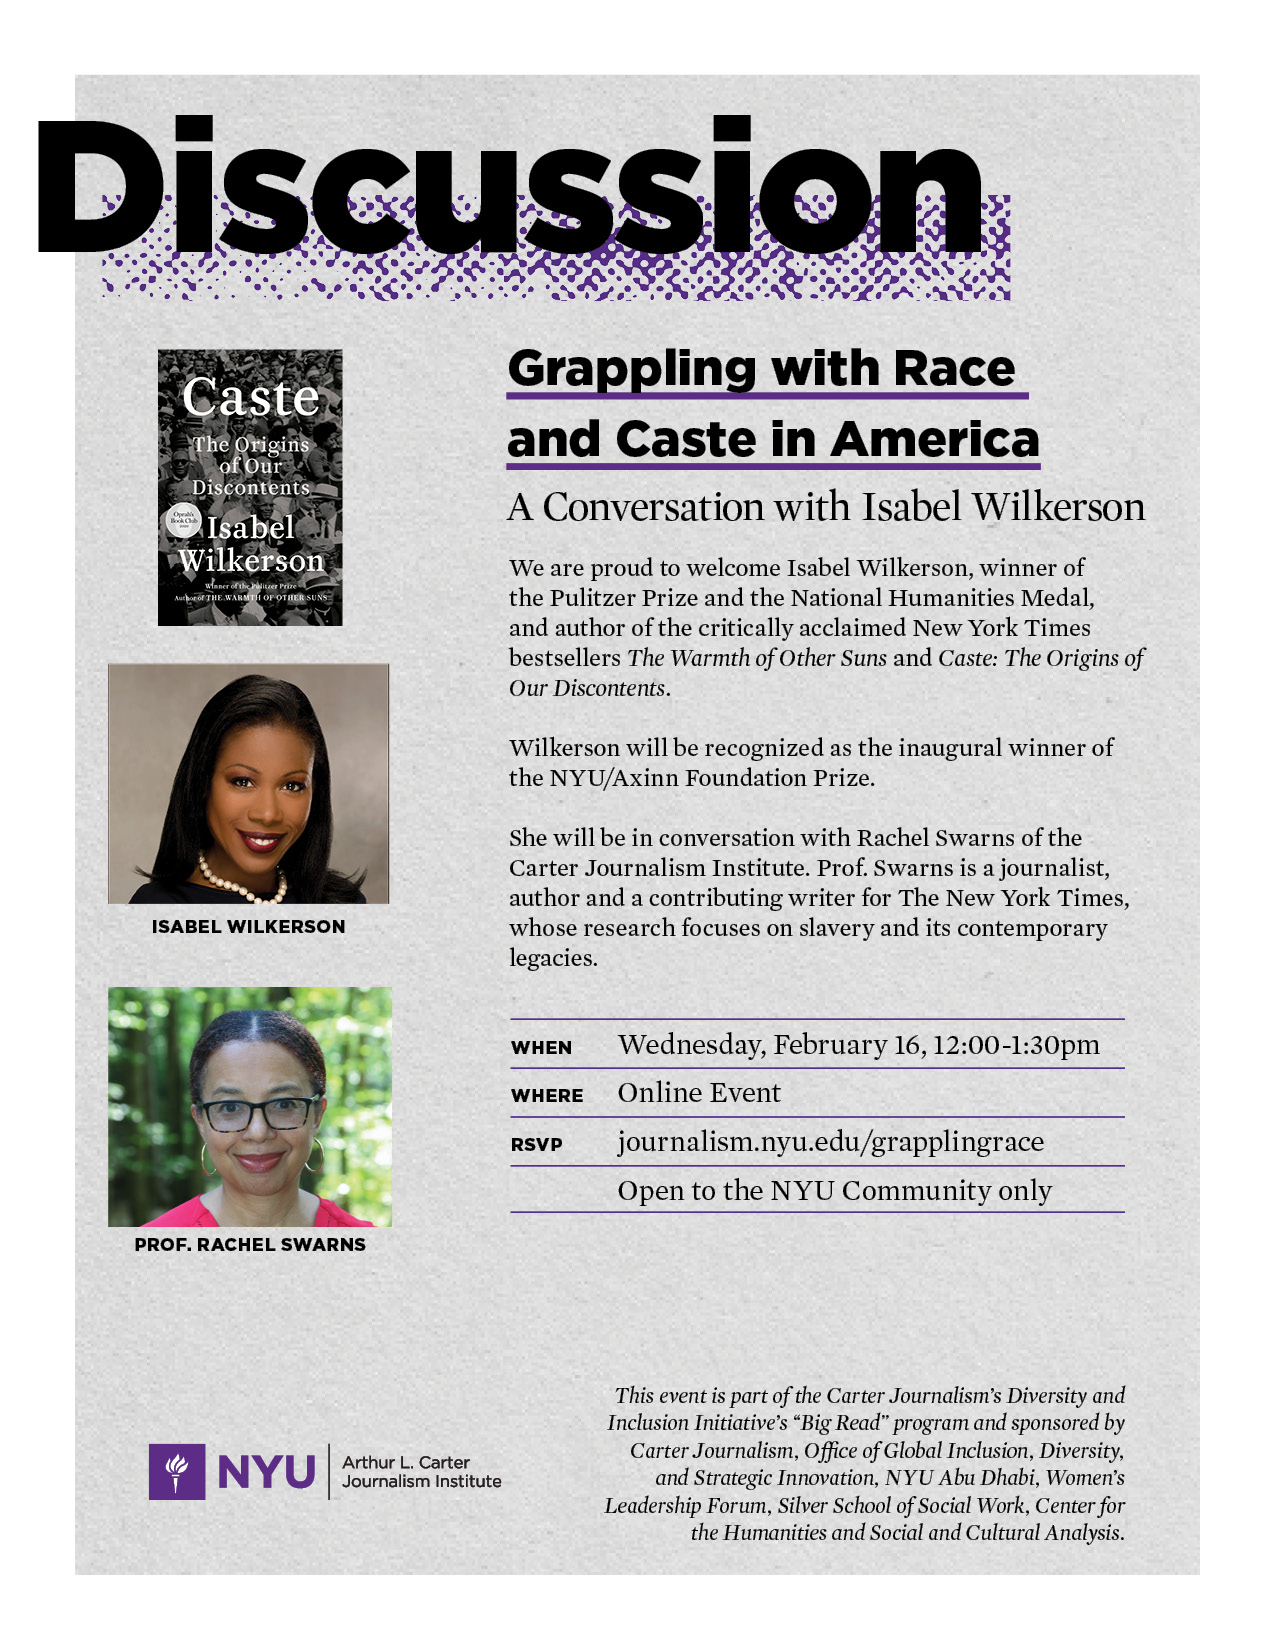 Event Poster - Grappling with Race and Caste in America - See event page for details